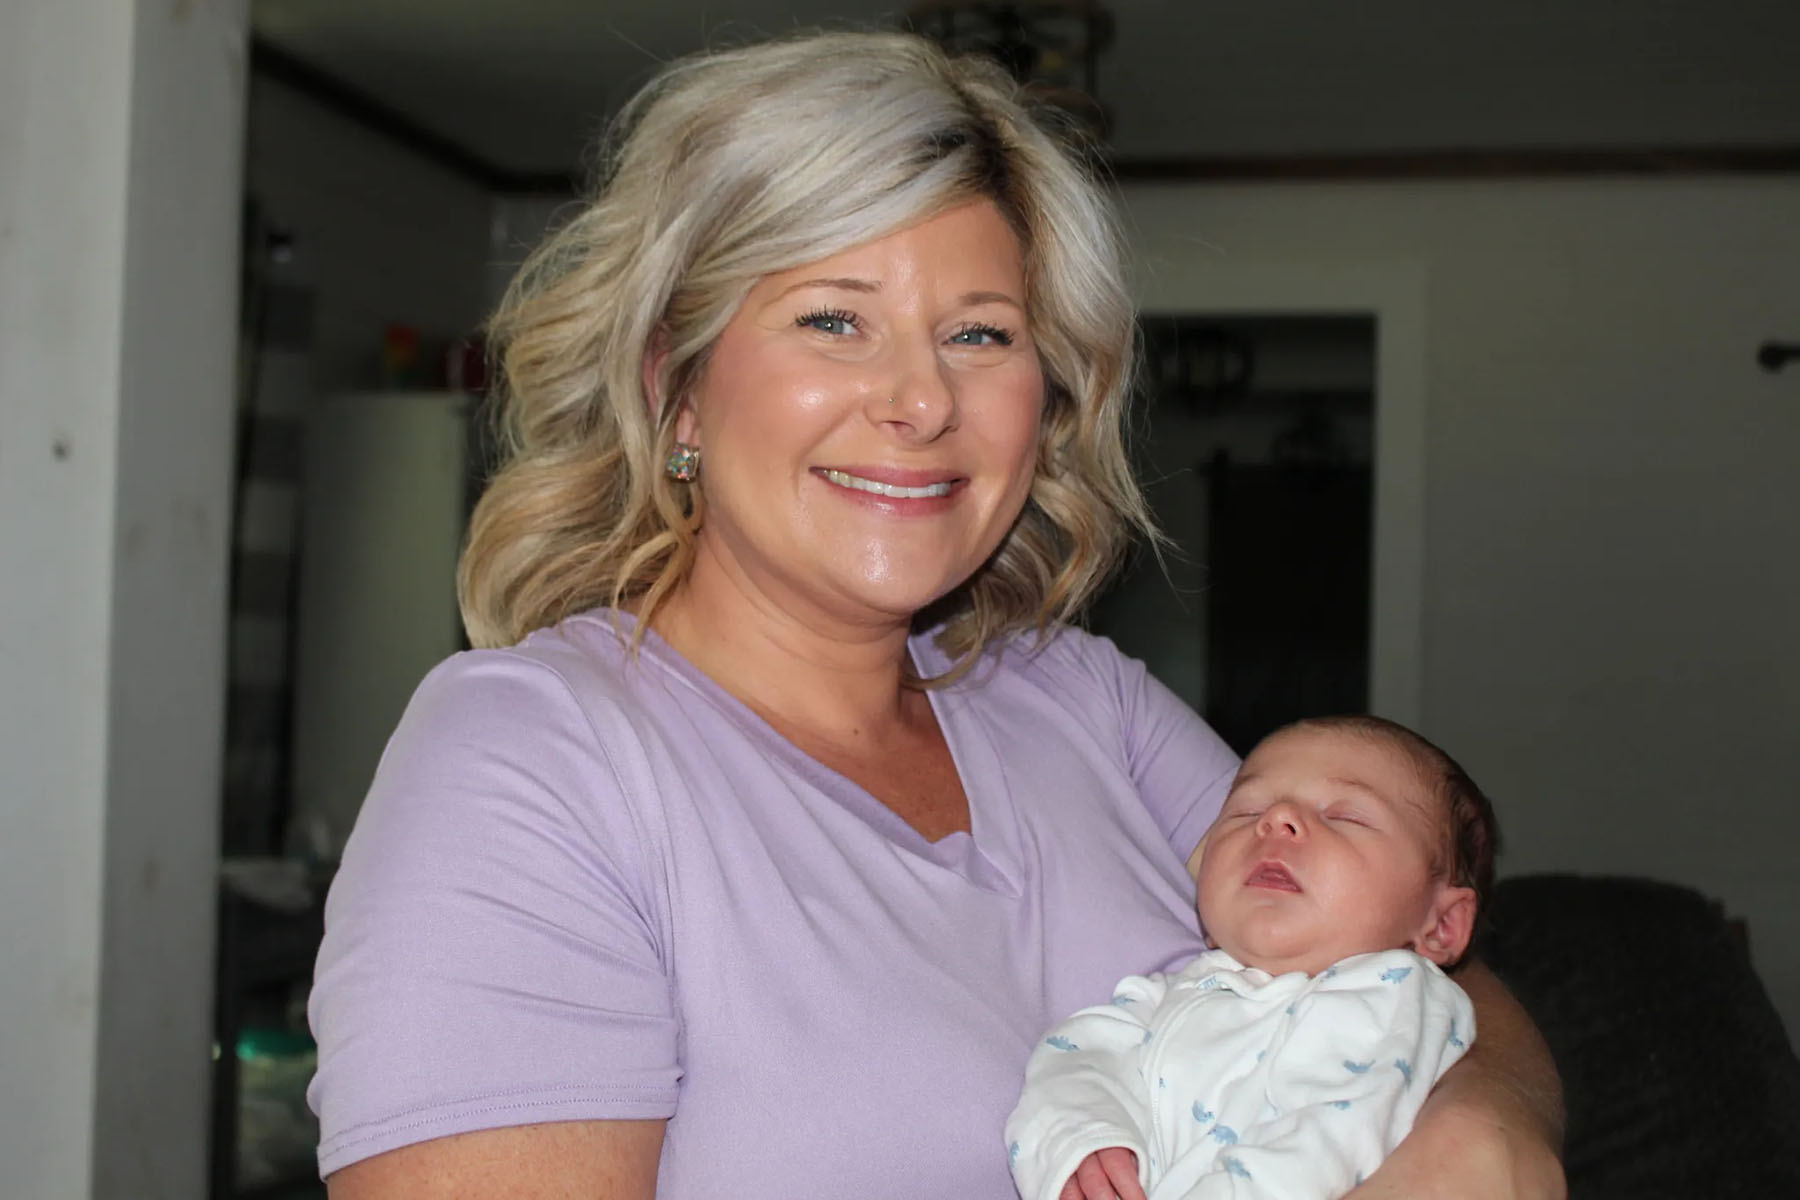 Deanna Buckins holds her sleeping infant and smiles.